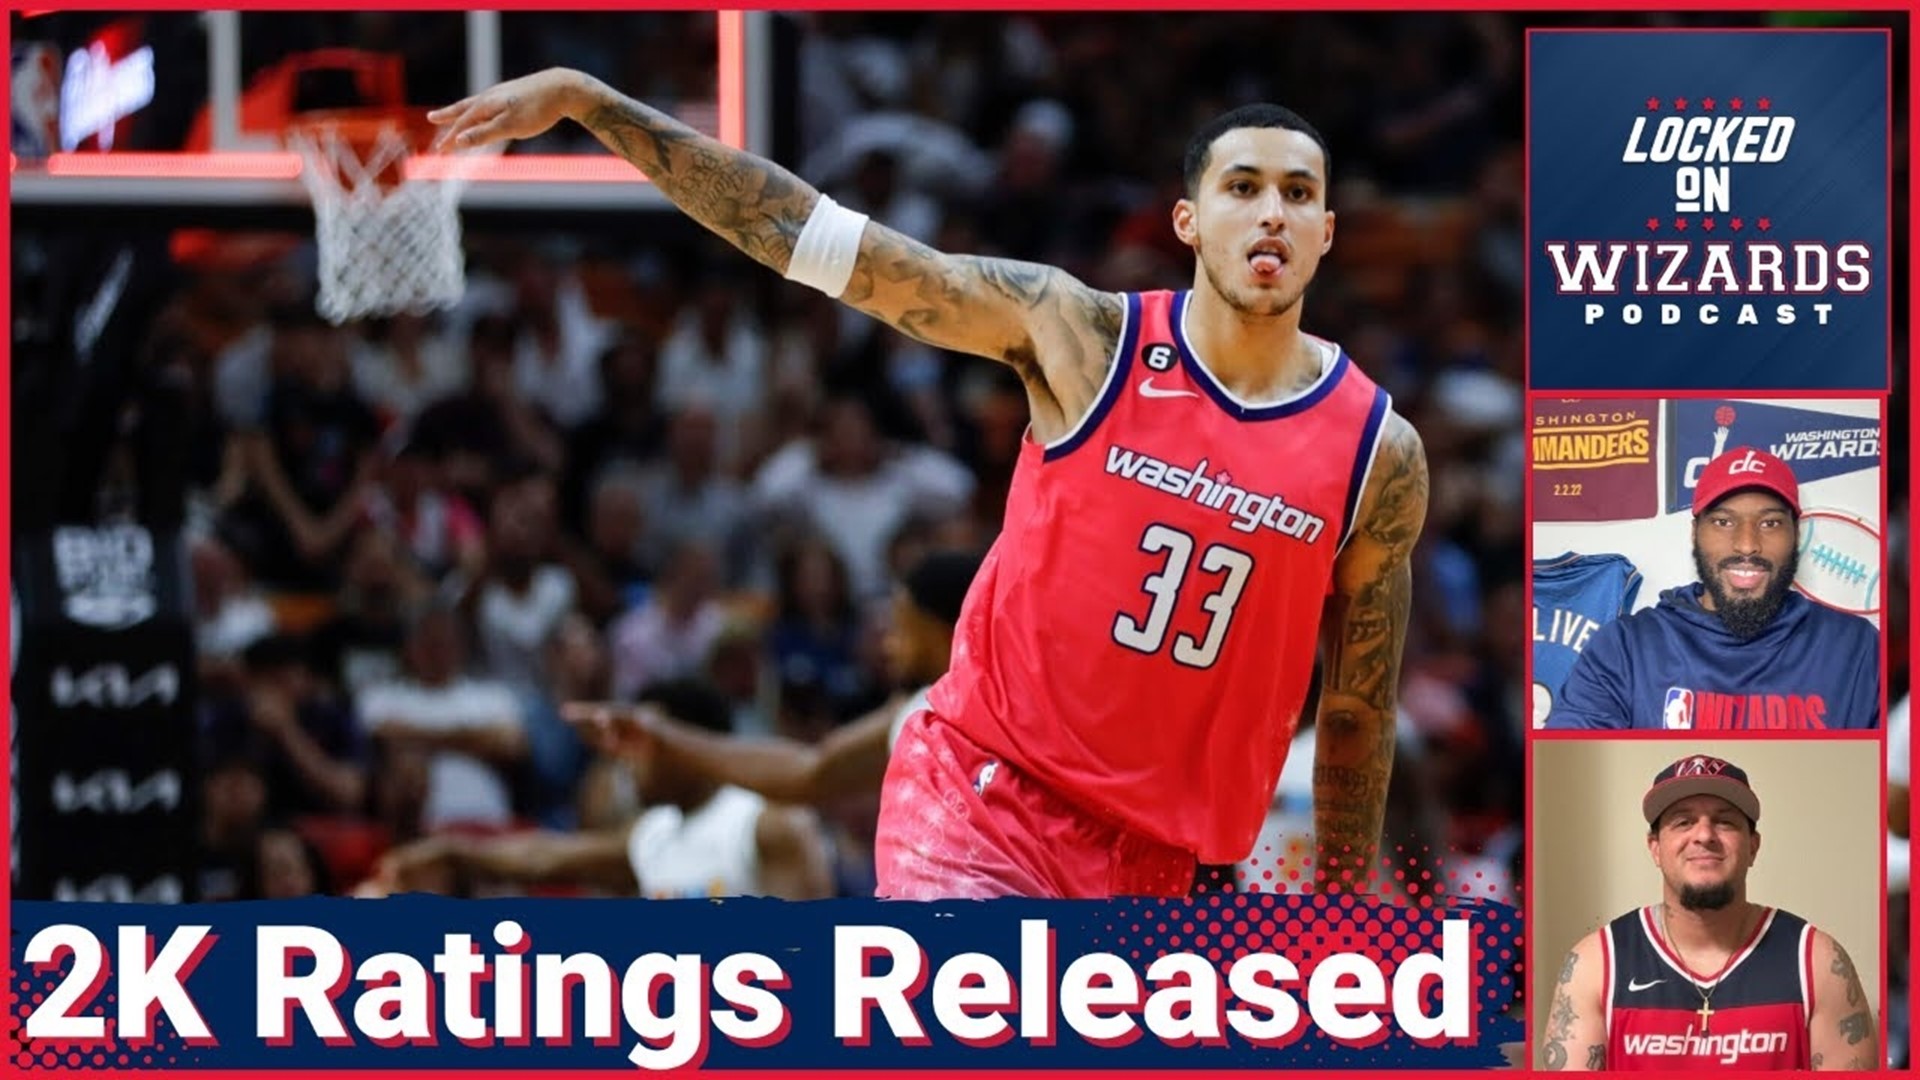 NBA 2K ratings were released, do they really matter outside of gaming? kcentv